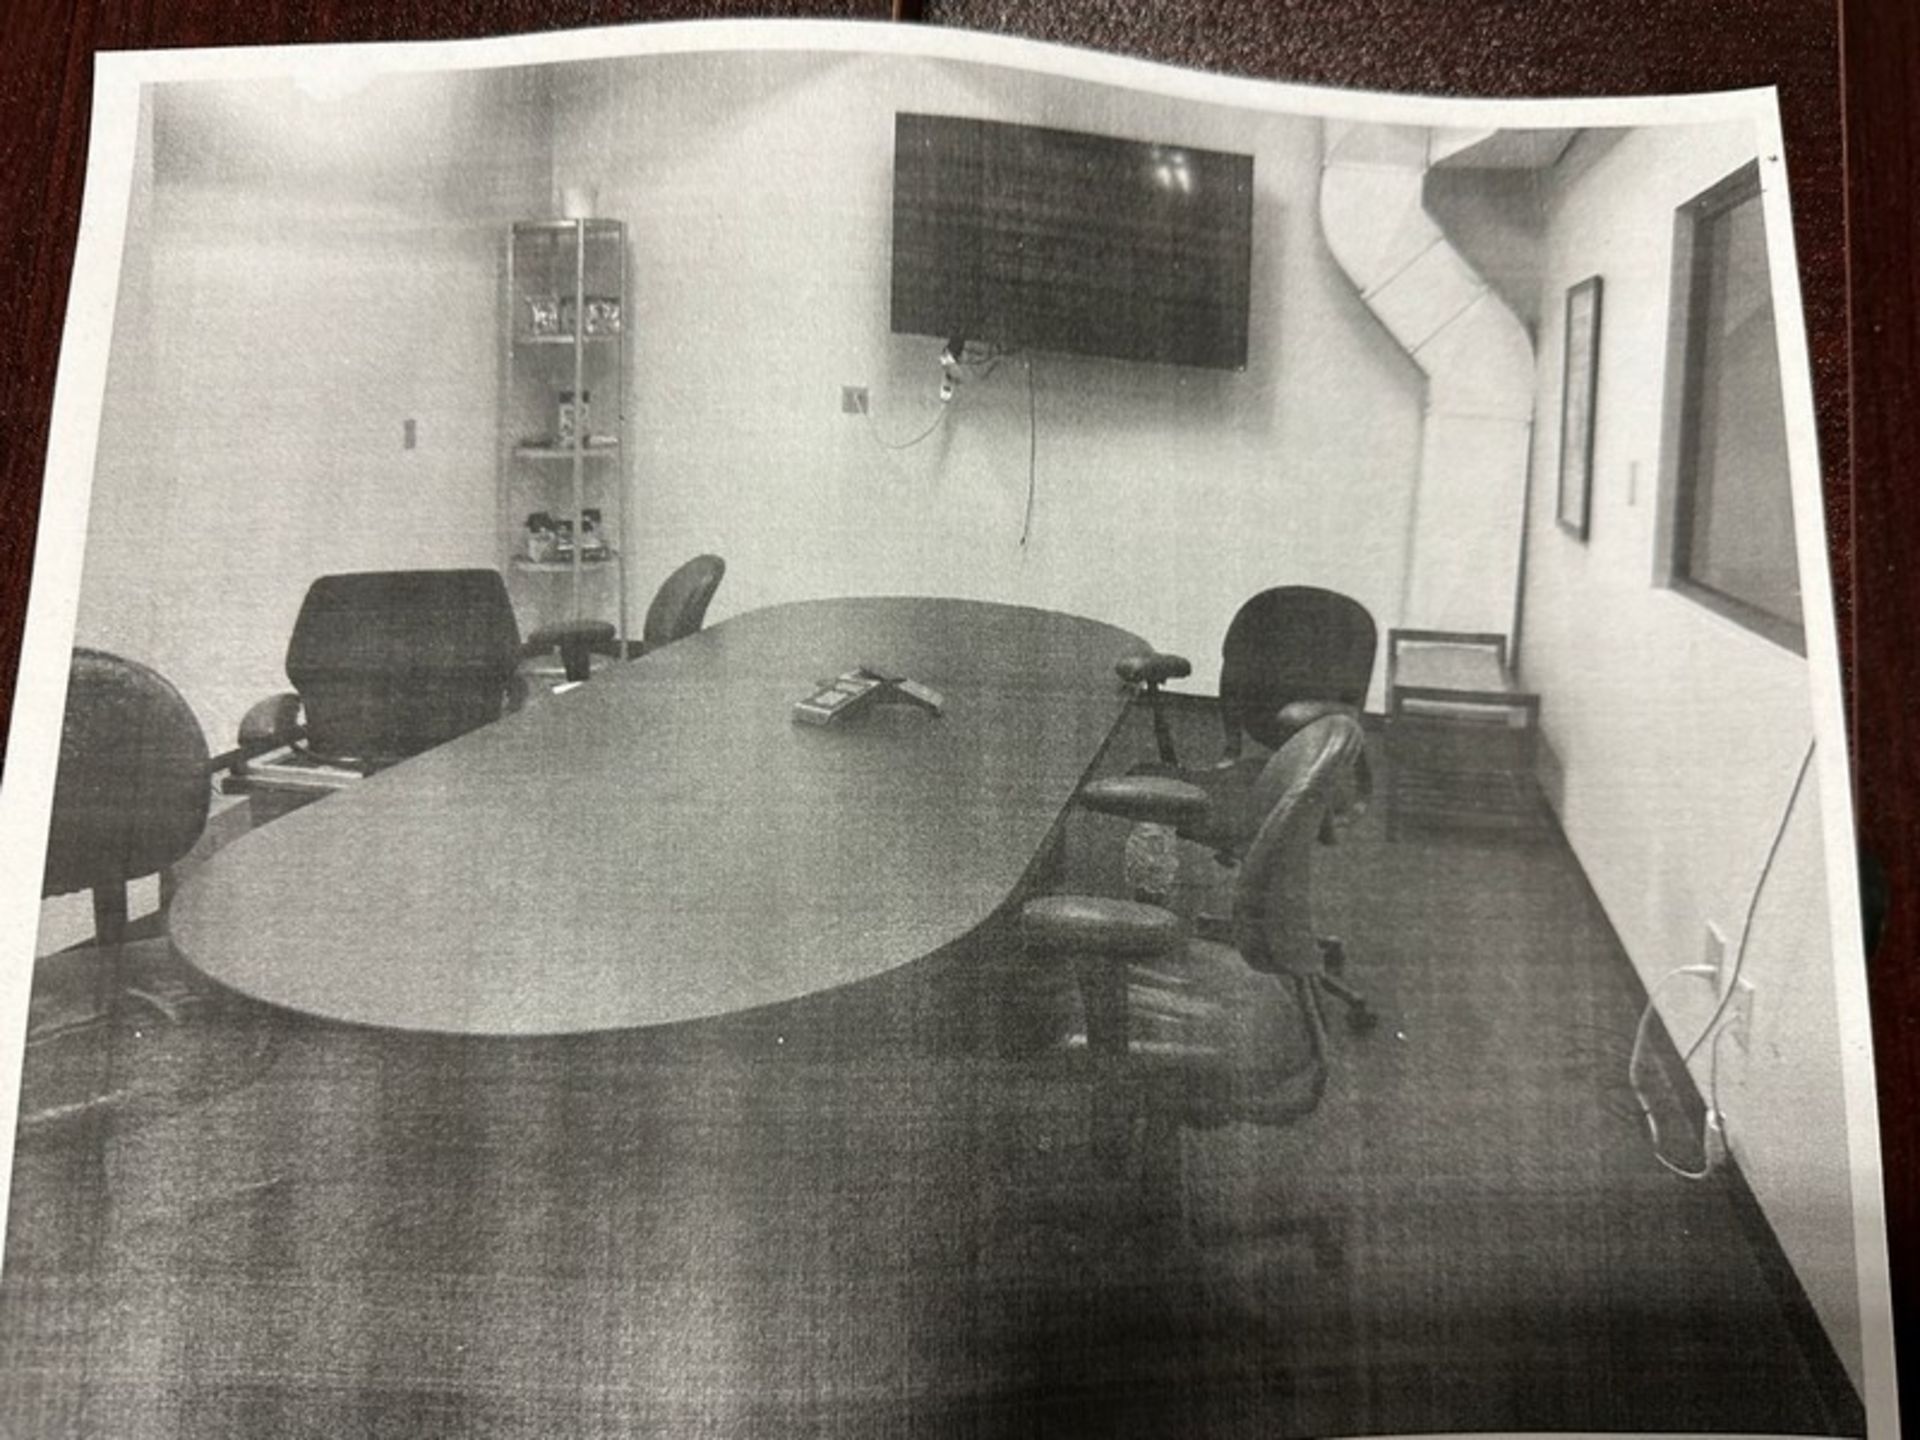 Conference Table: 10' Already disassembled (Located East Rutherford, NJ) (NOTE: REMOVAL 2-DAYS